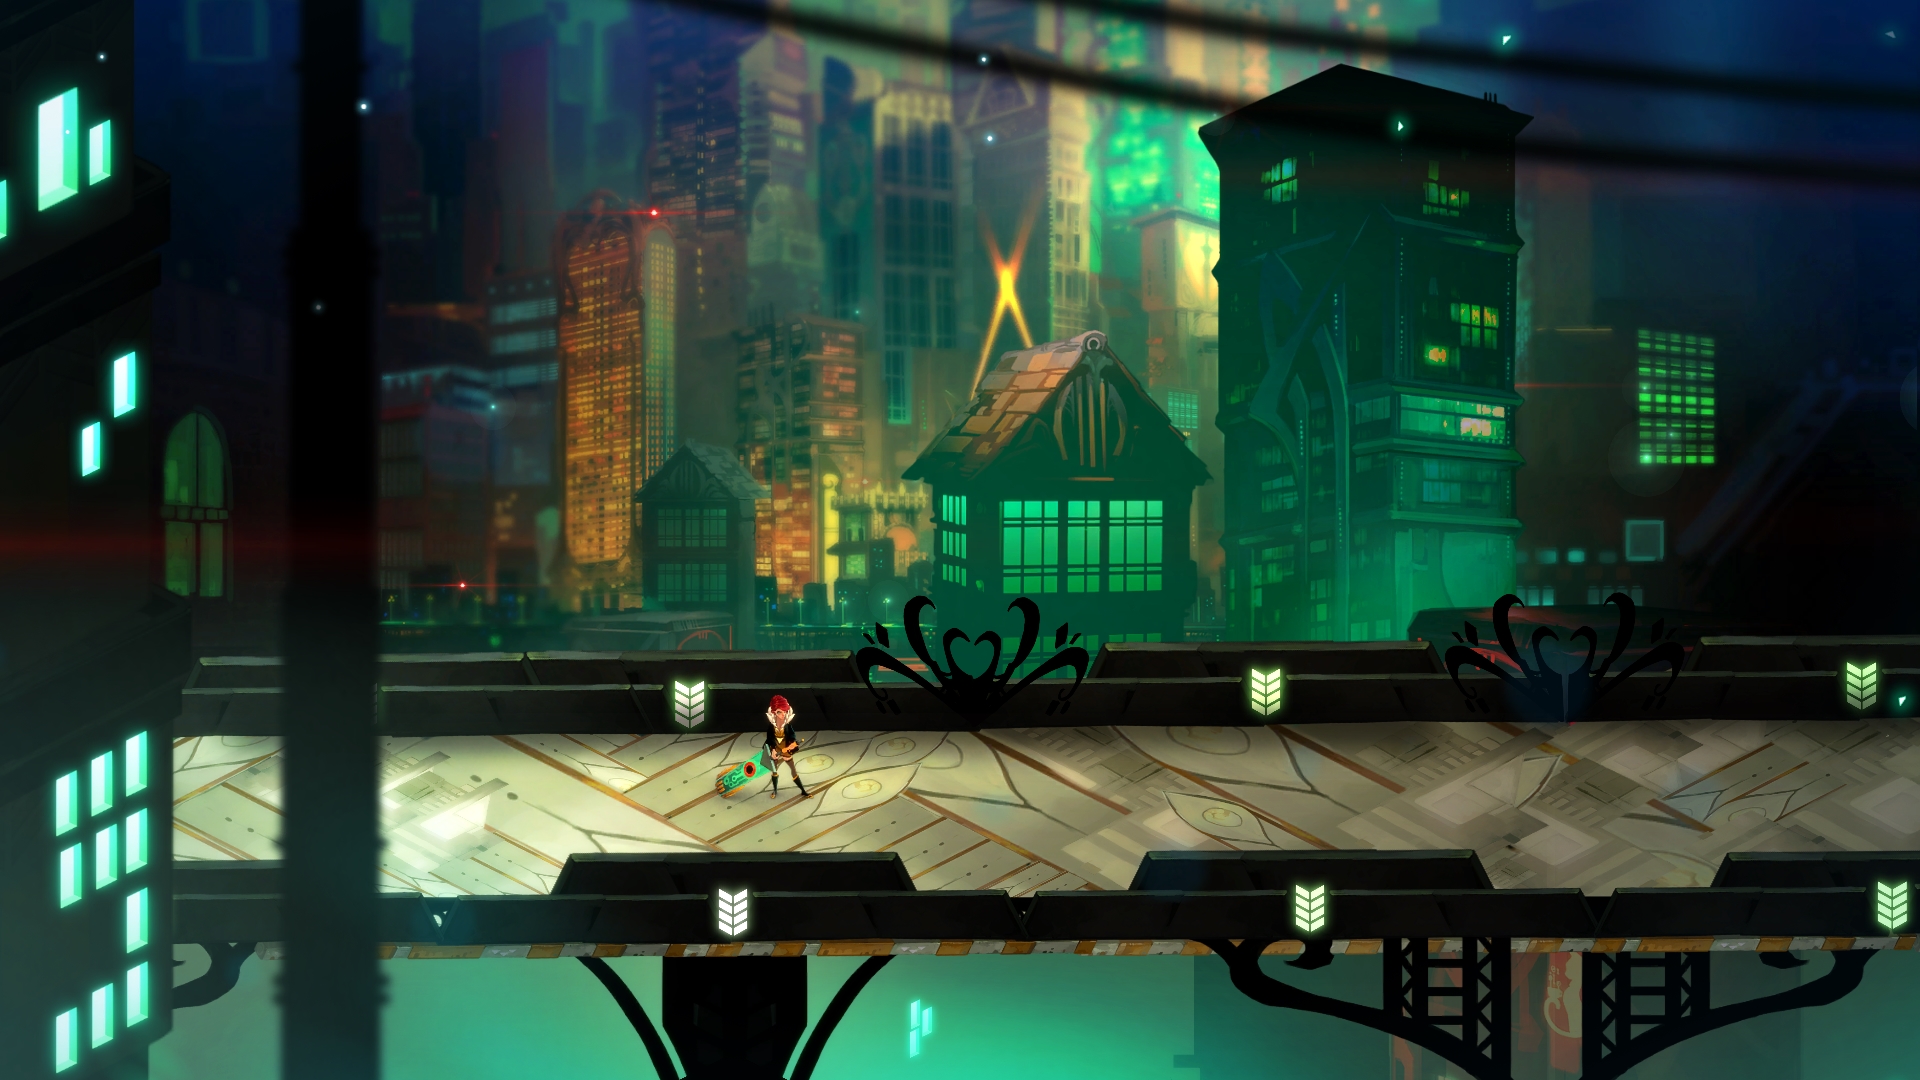 HD wallpaper featuring a scene from the game Transistor with a character standing in a futuristic cityscape.